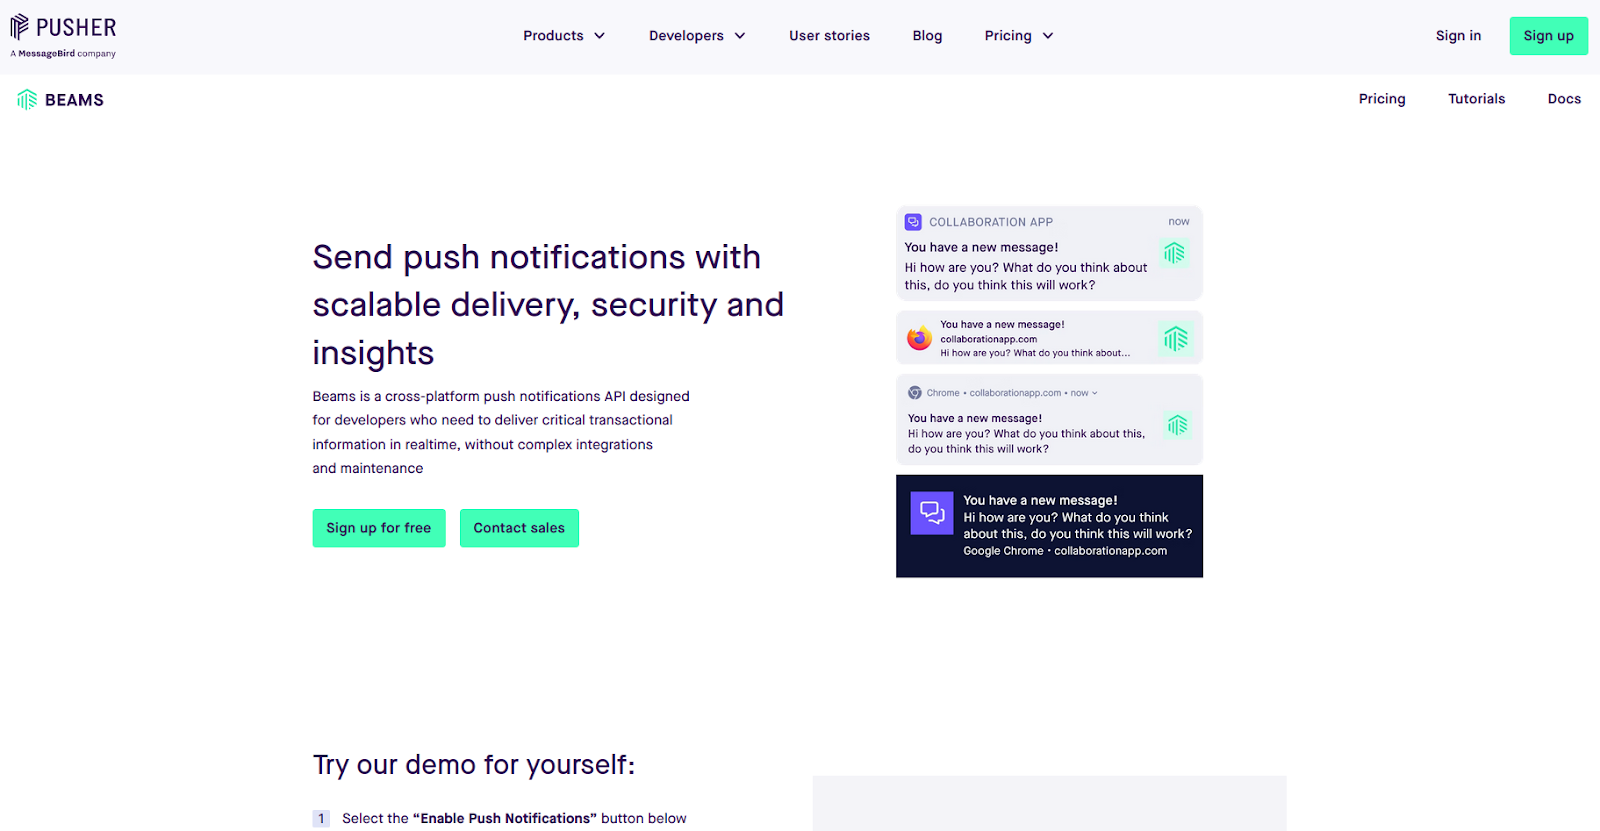 A screenshot from Pusher Beams’ product landing page.